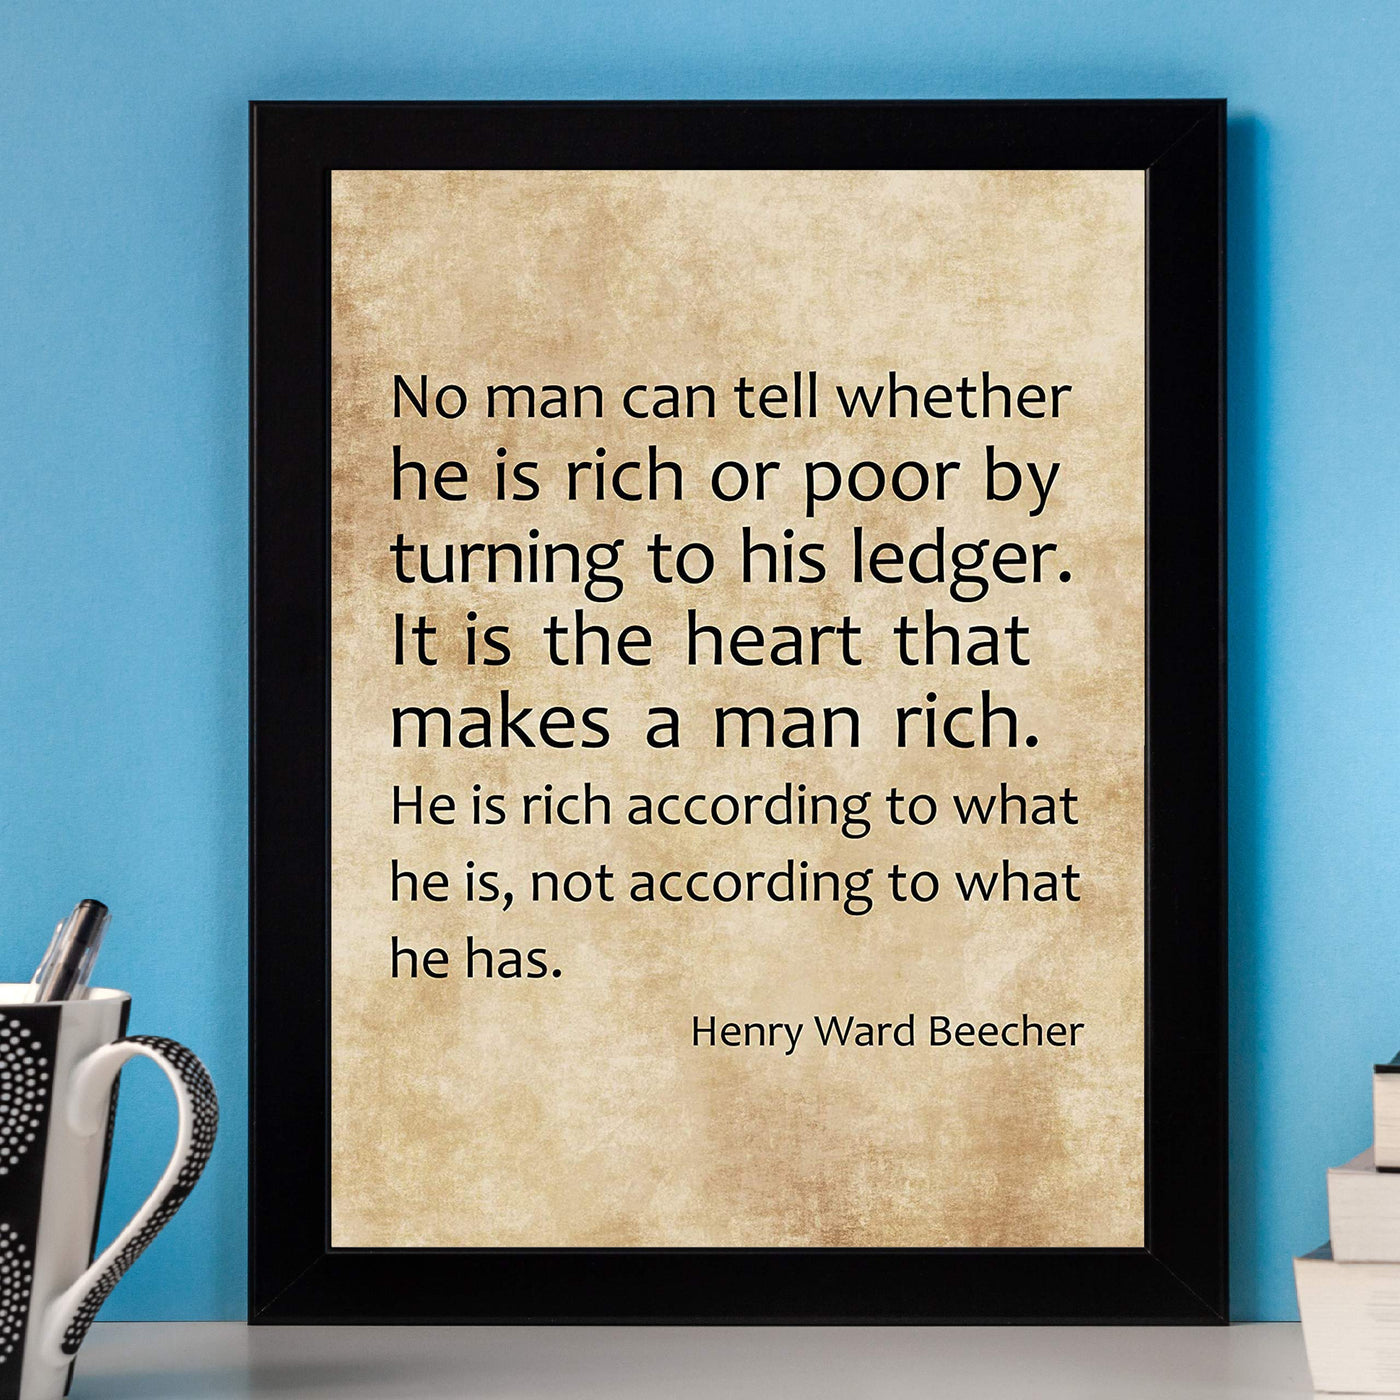 Henry Ward Beecher-"It Is the Heart That Makes a Man Rich" Inspirational Quotes Wall Art -8 x 10" Distressed Parchment Design Print-Ready to Frame. Perfect Home-Office-School-Study-Church Decor!